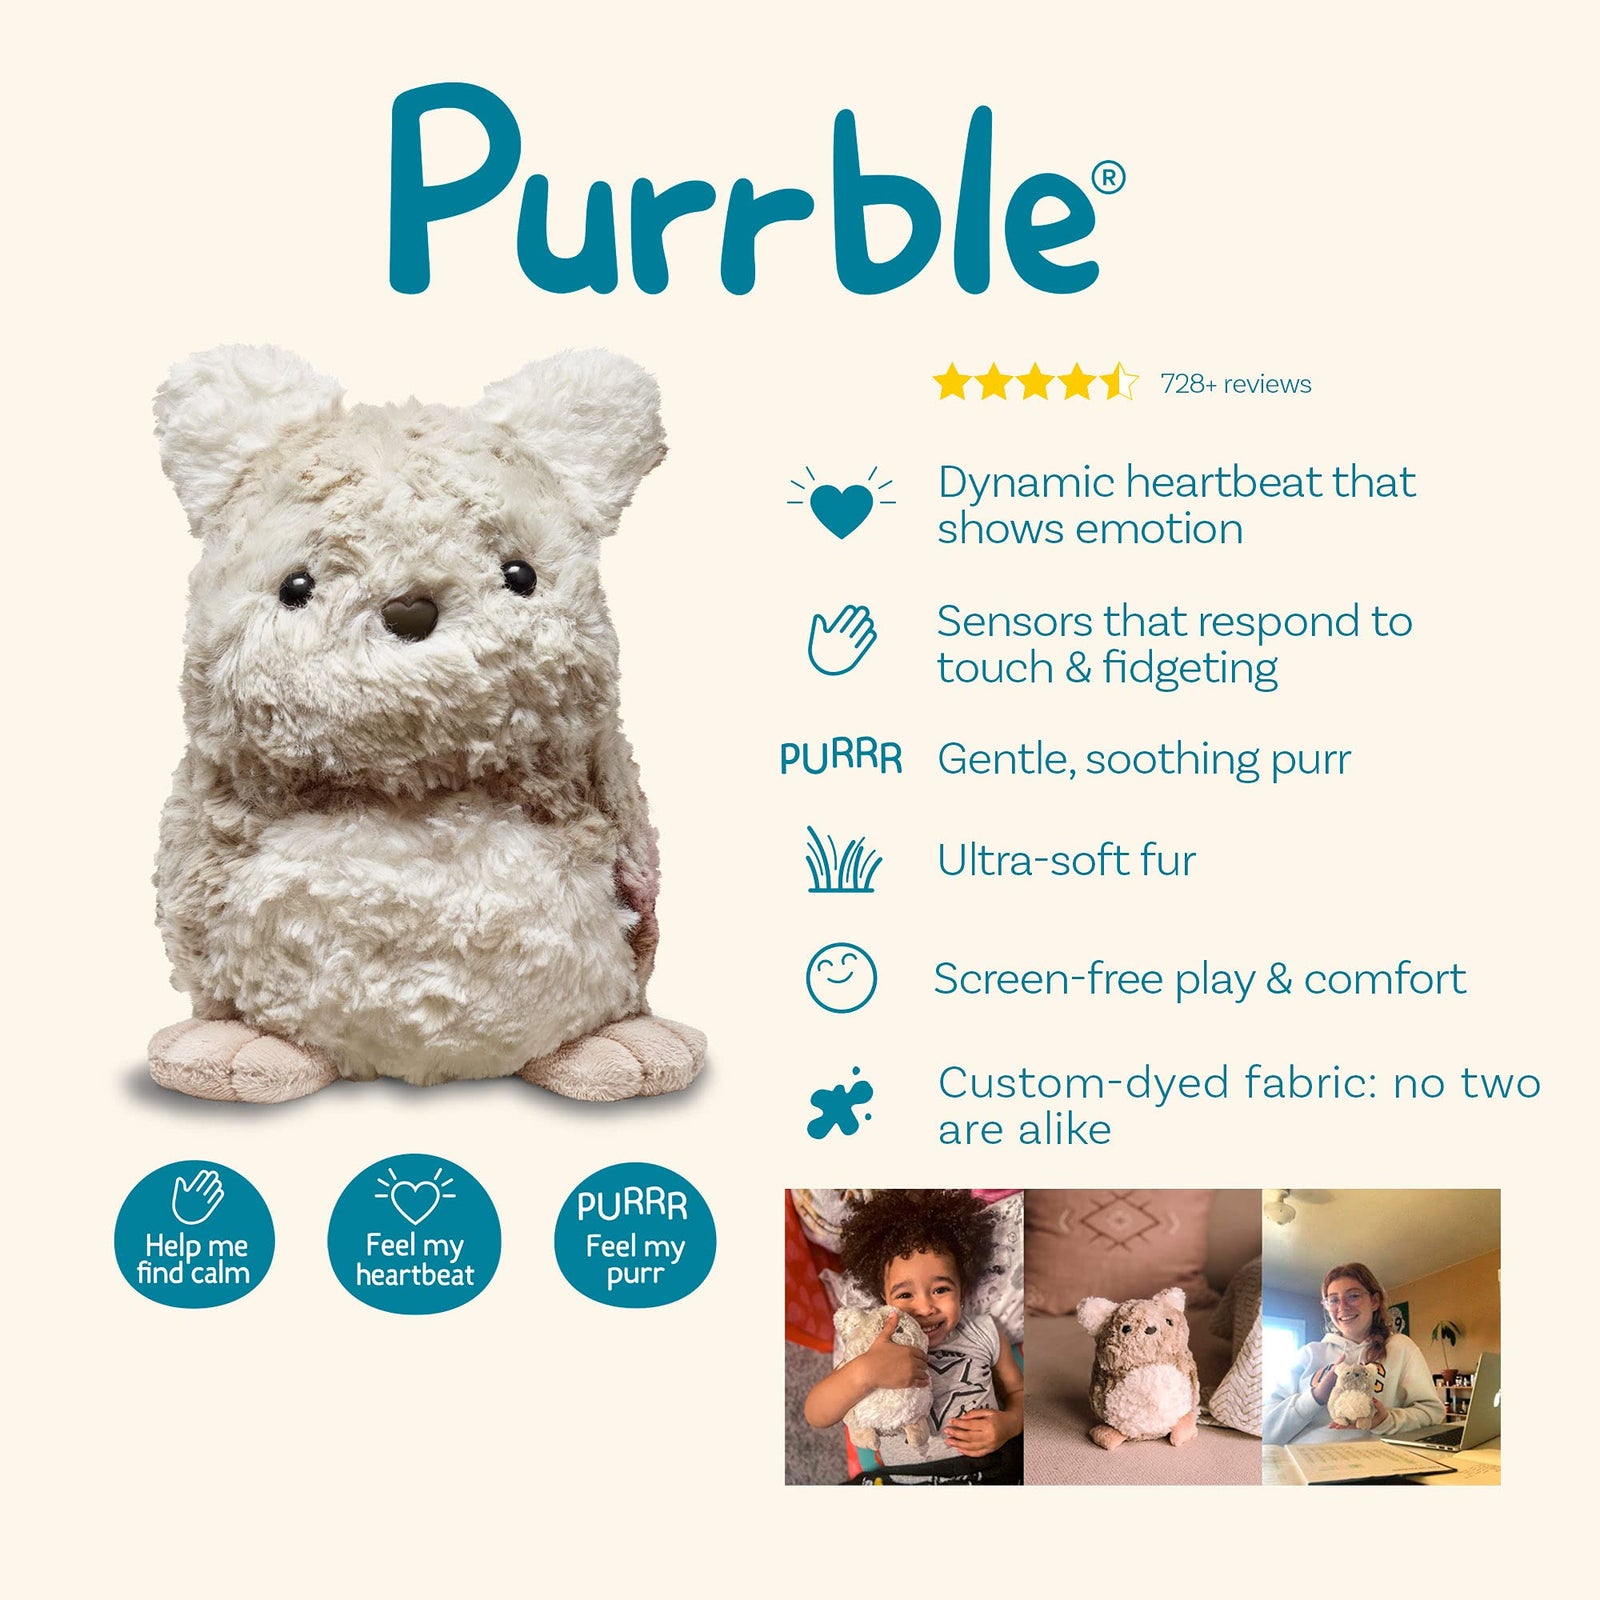 Purrble - Calming Toy Companion with Dynamic Heartbeat and Soothing Purr - Interactive Plush Companion for All Ages - Stuffed Animal Doll for Emotion Regulation - Cuddle and Pet Plushies